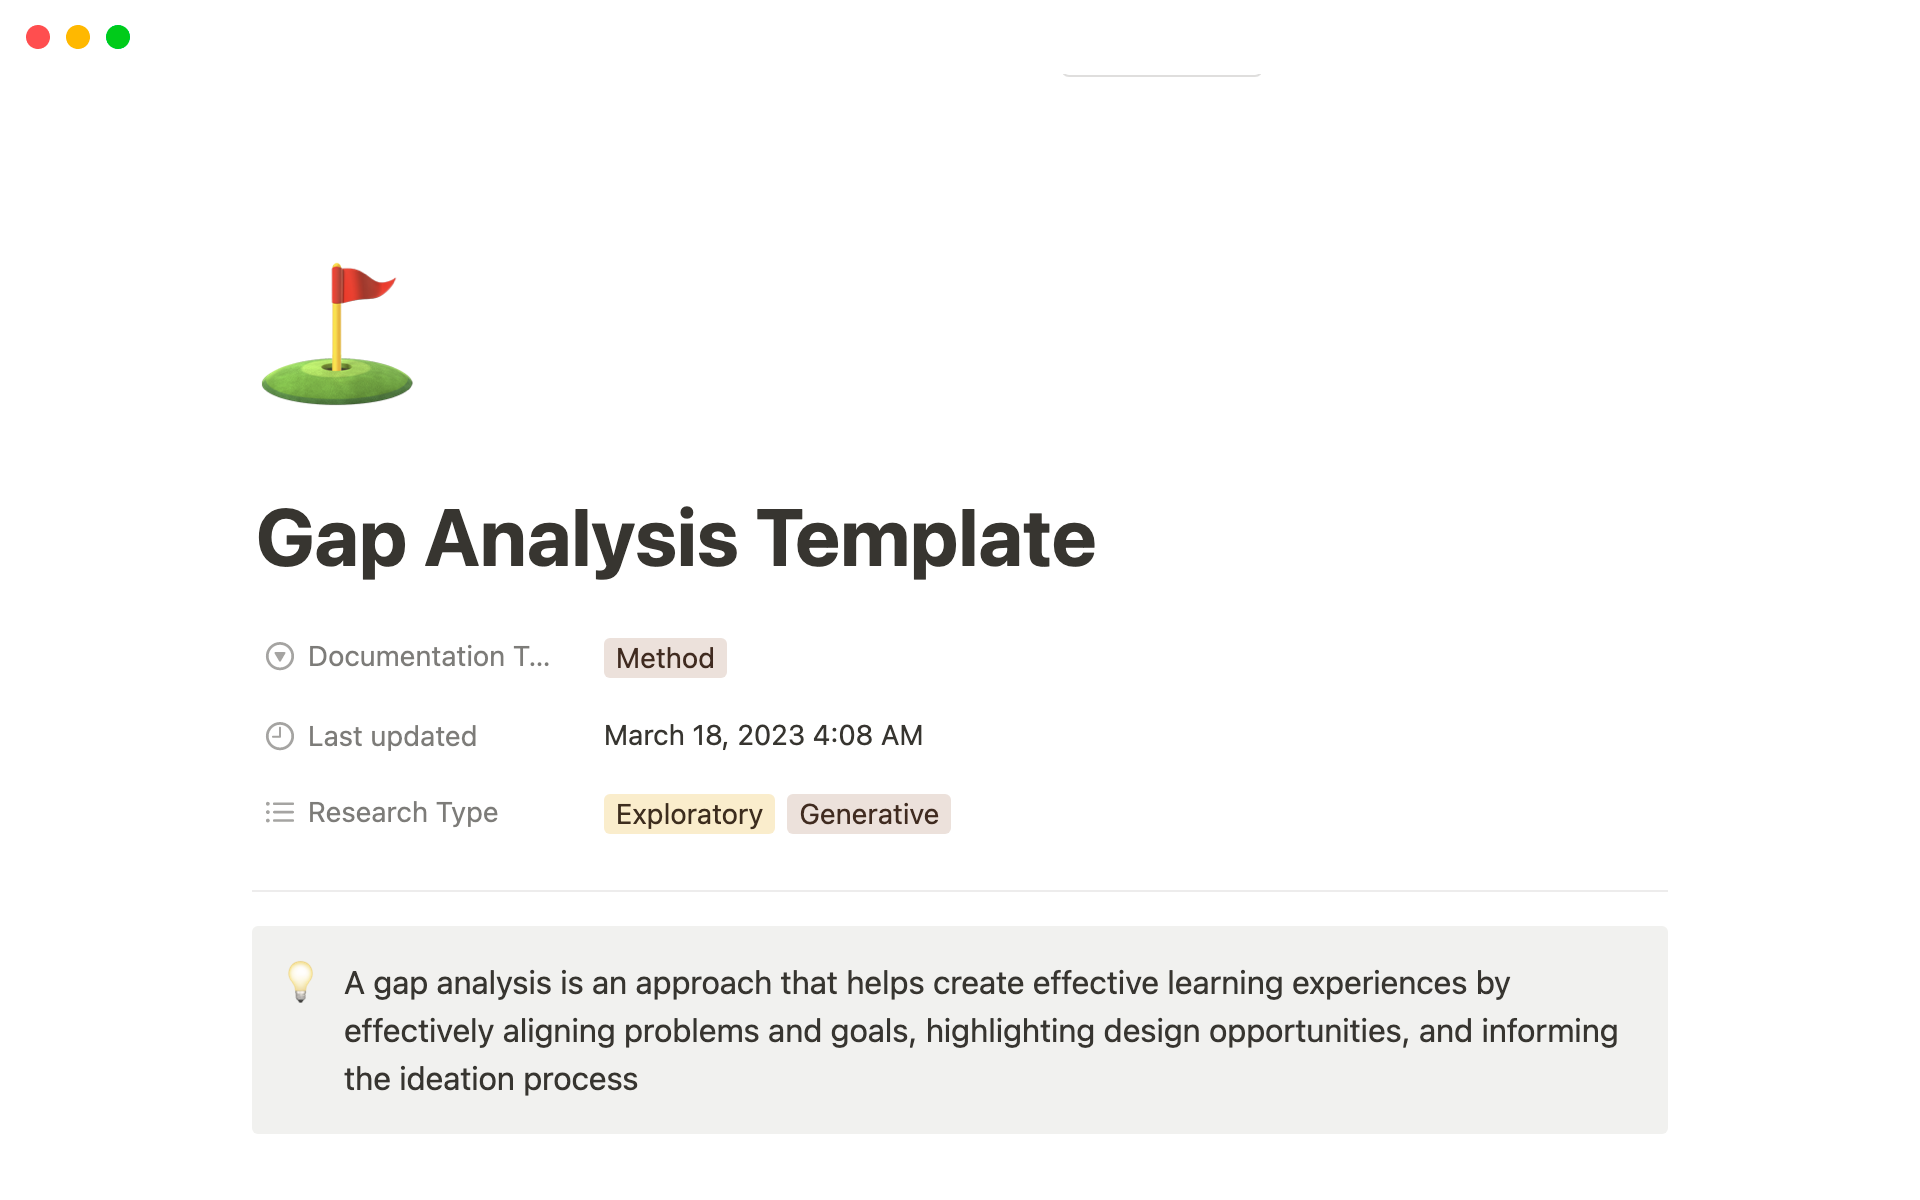 Top 10 Competitive Analysis Templates for Product Development Managersのテンプレートのプレビュー